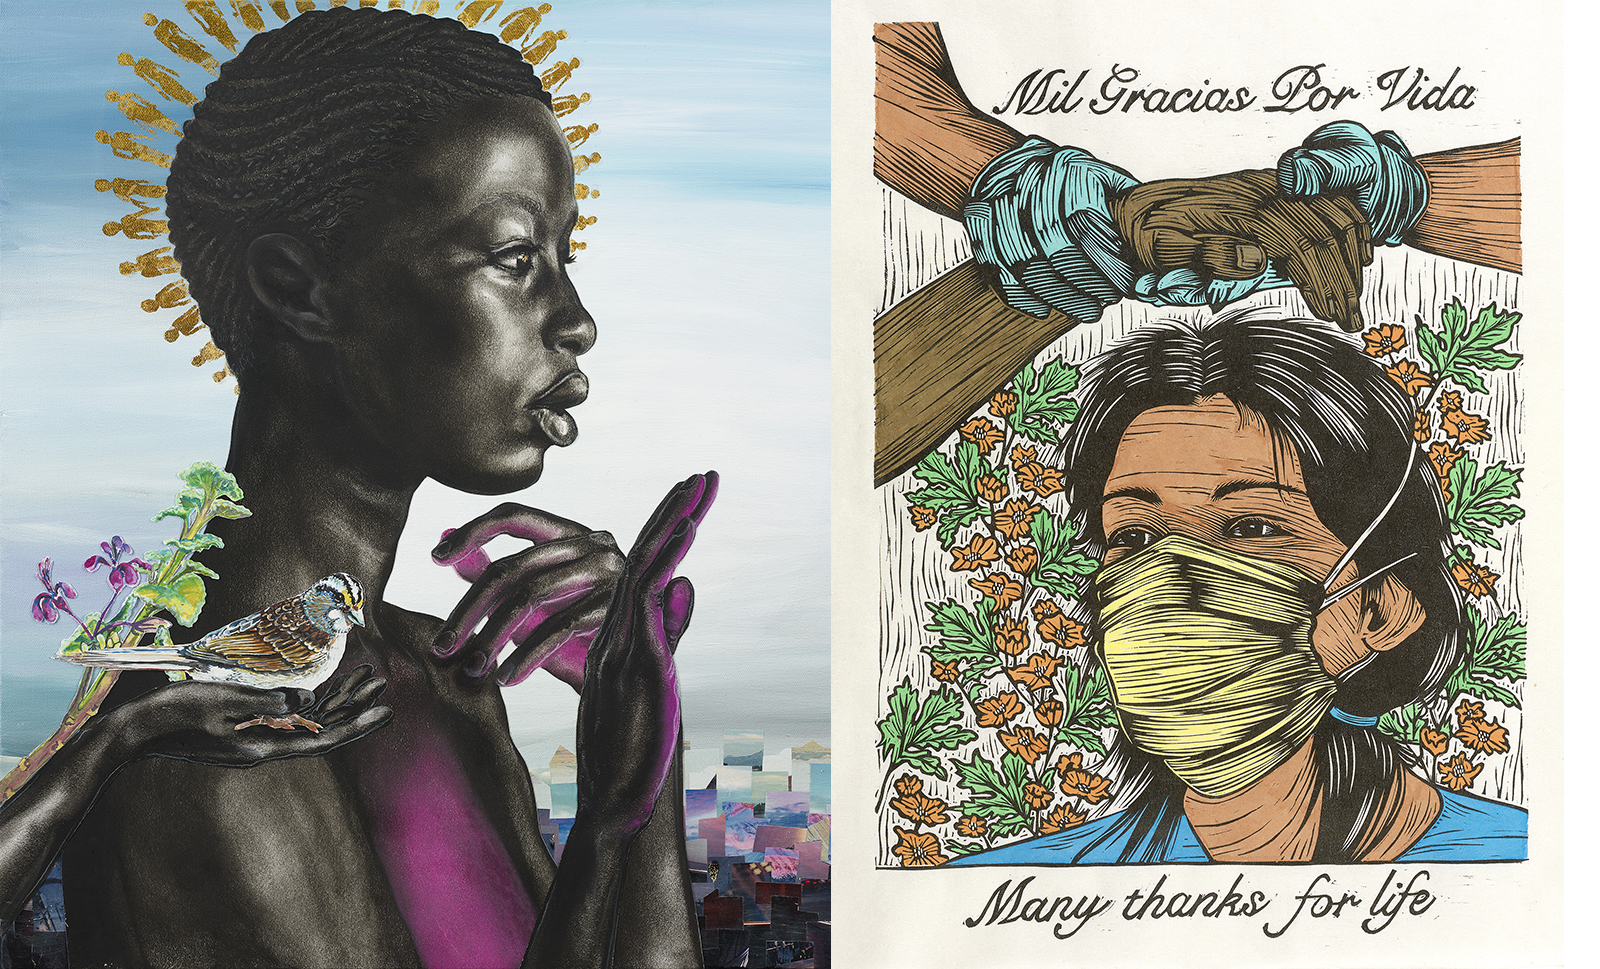 On the left: an image by Nicole Dixon of a Black woman with holding up her hands and a bird on her shoulder. On the right: an image by Juan R. Fuentes of a woman wearing a mask, under gloved hands holding another person's hands.